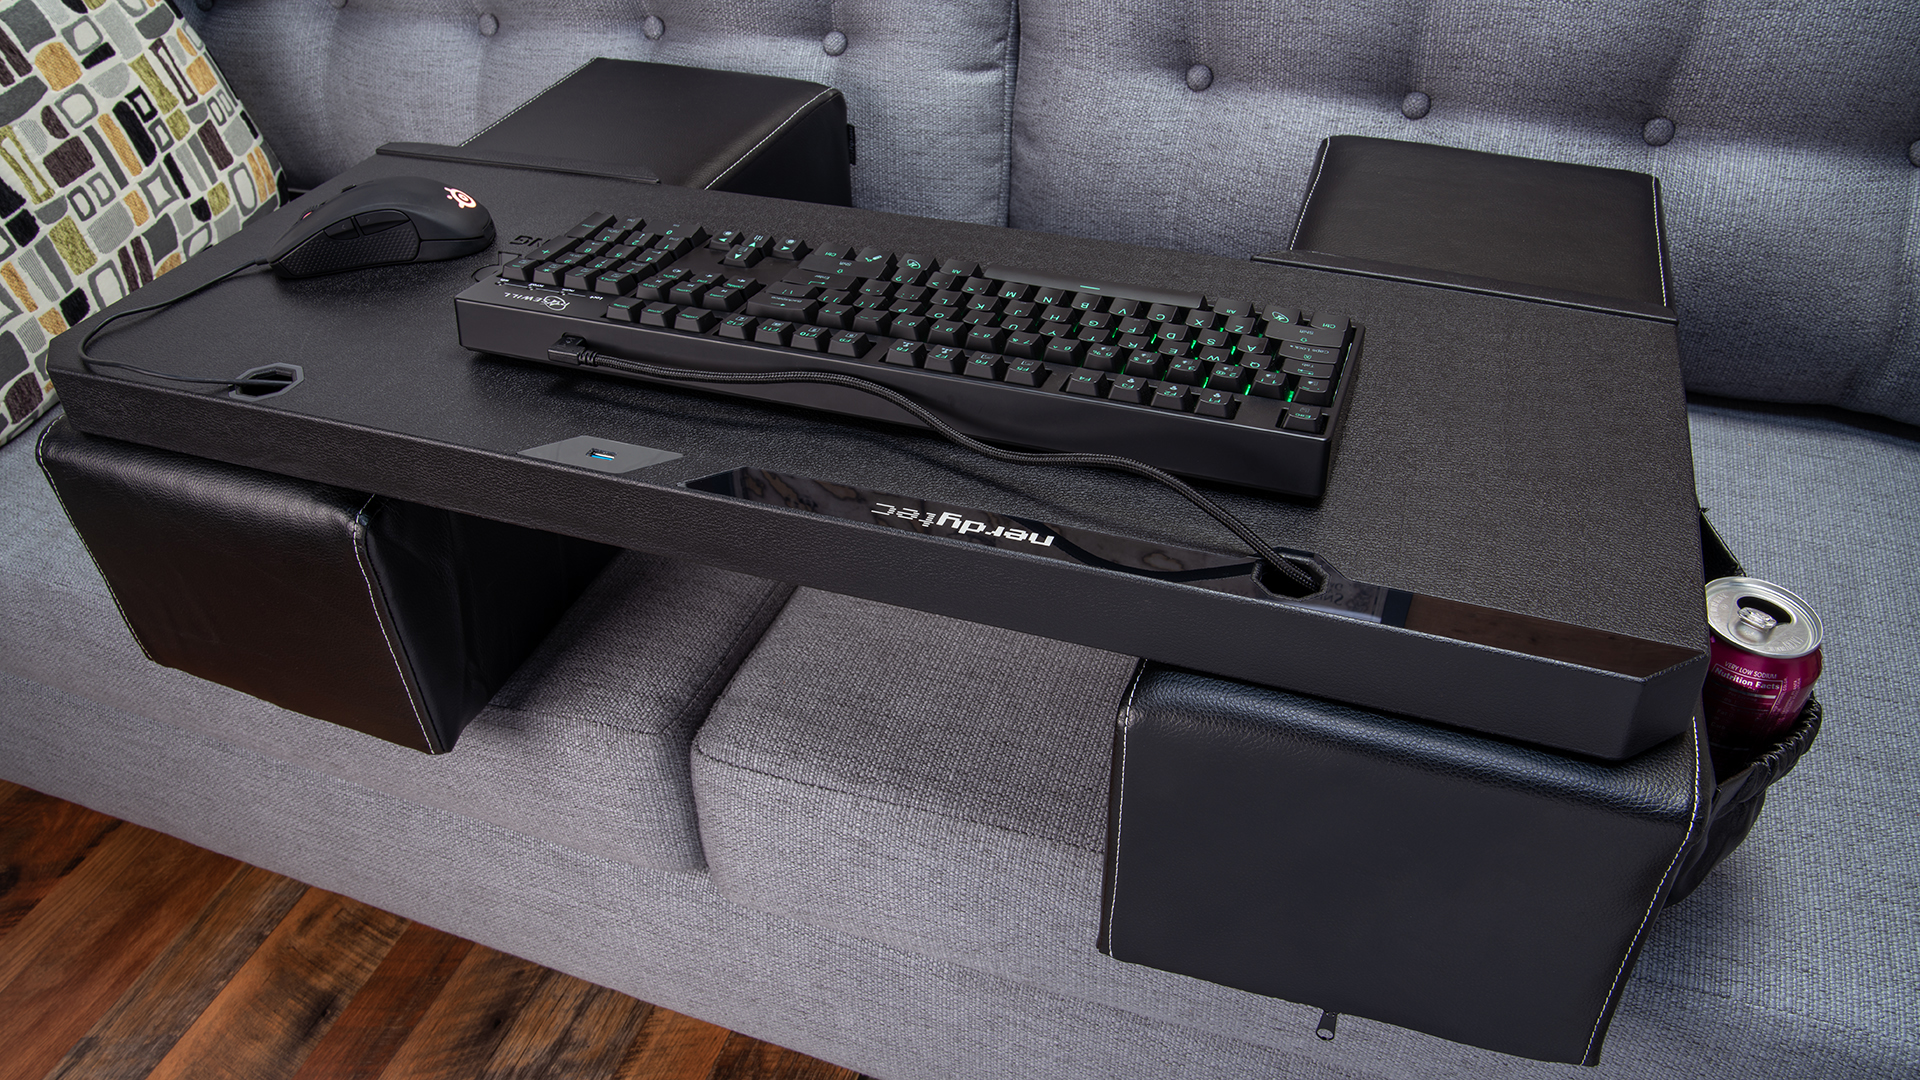 The Couchmaster Cycon is an innovative couch gaming lap desk that brings the full PC gaming experience to the comfort of your sofa.